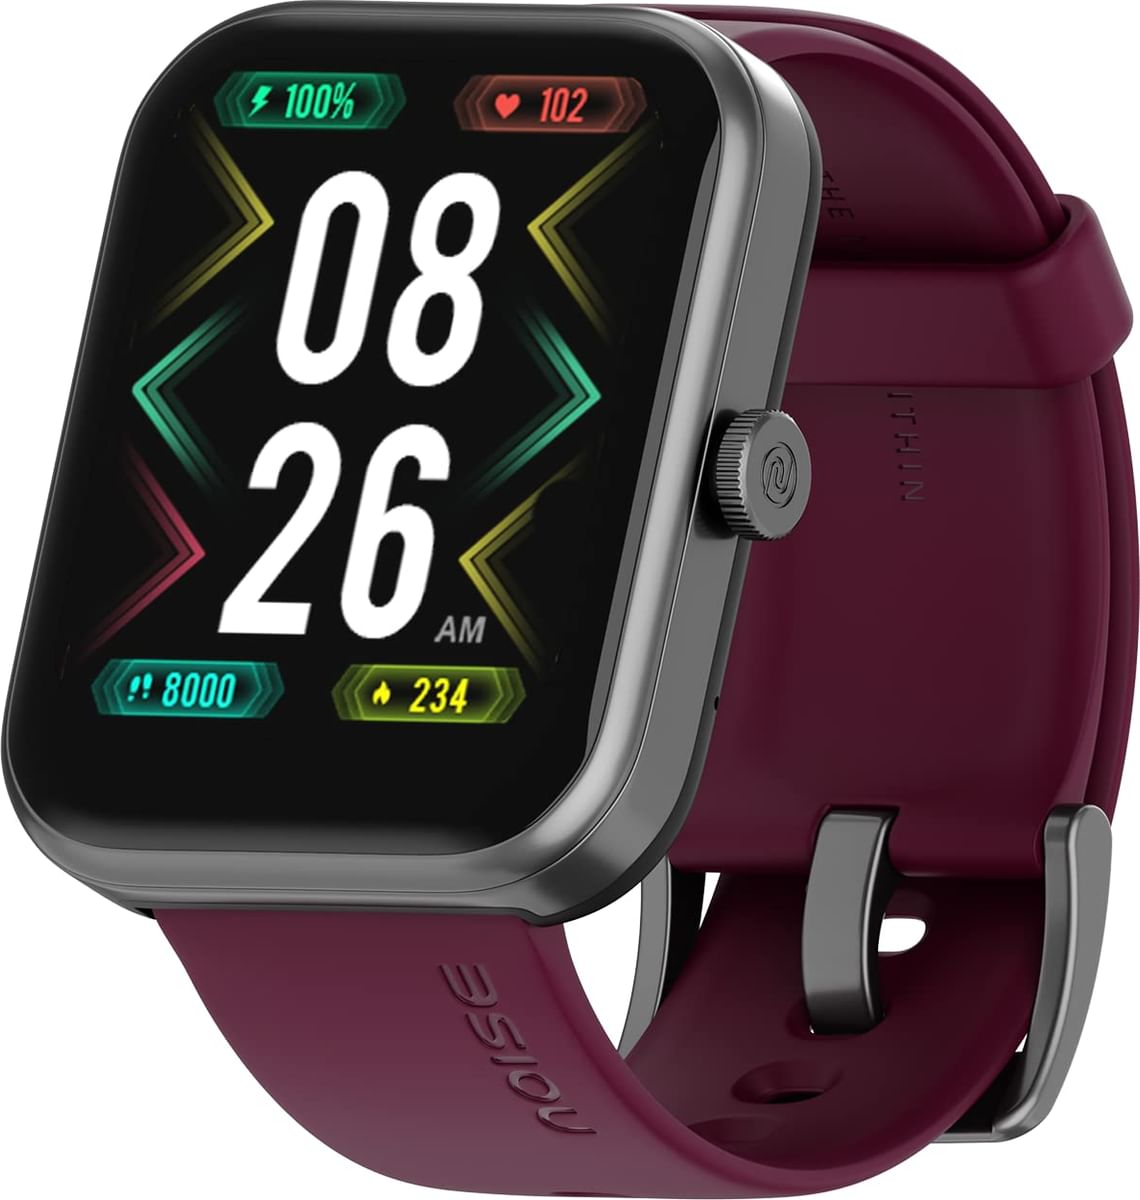 Hammer Pulse Smartwatch: Hammer launched Pulse smartwatch with temperature  sensor at Rs 2,799 - Times of India